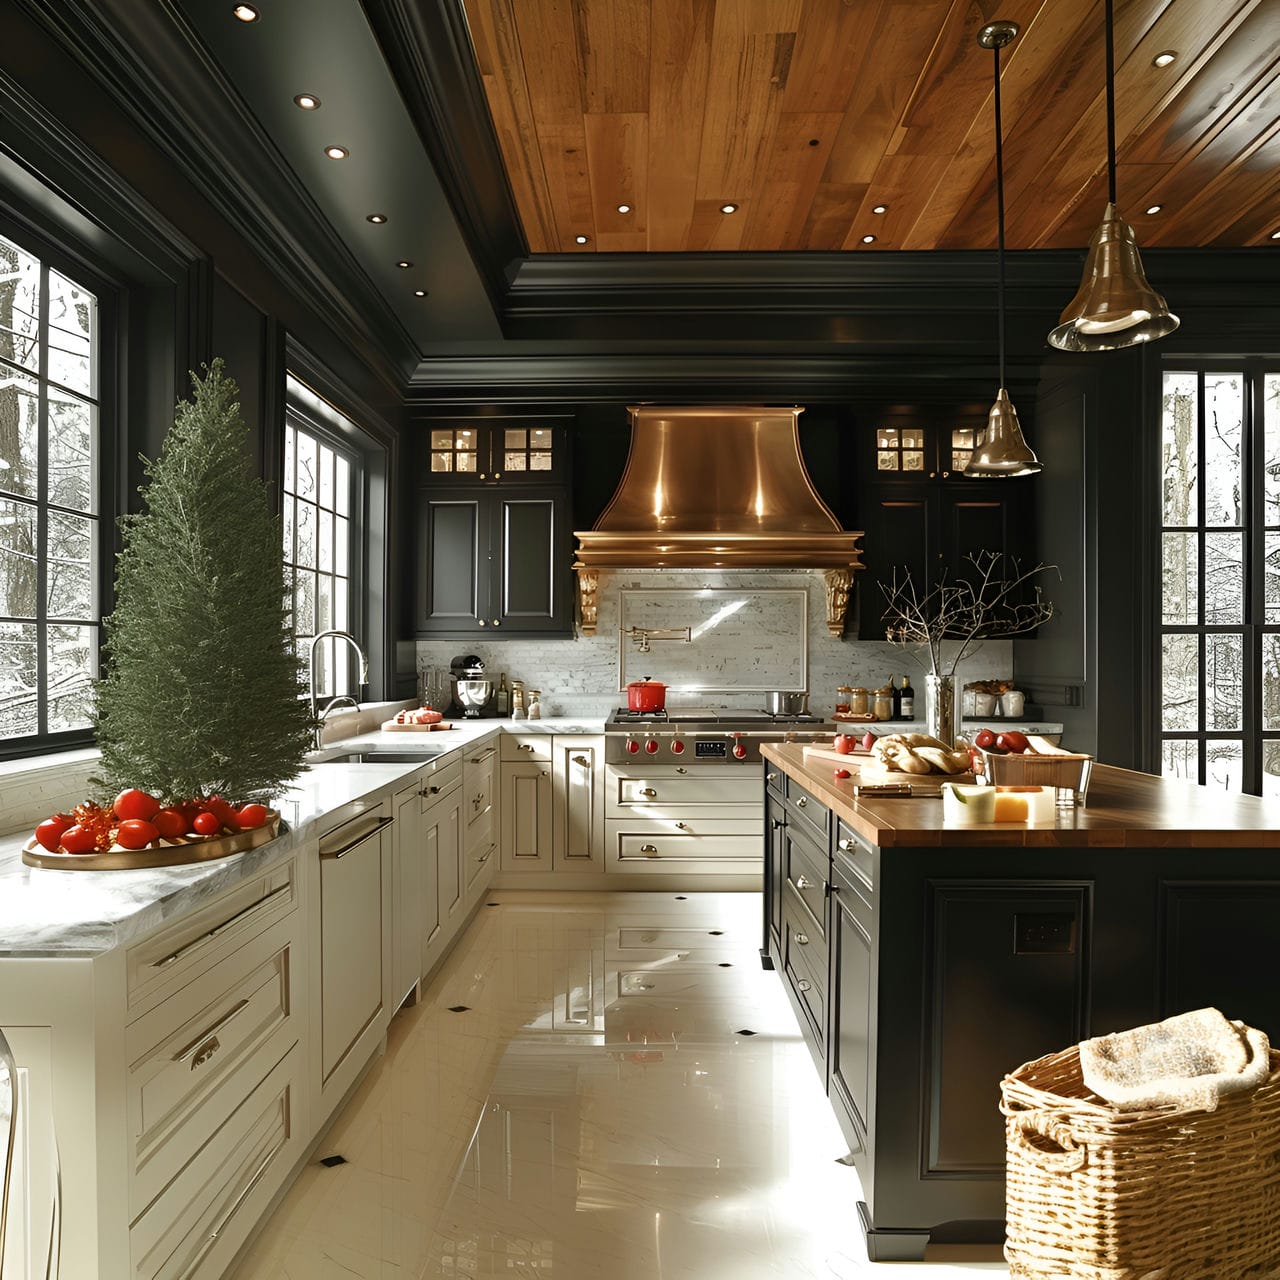 Kitchen: size, functionality, uses, furniture, and renovation